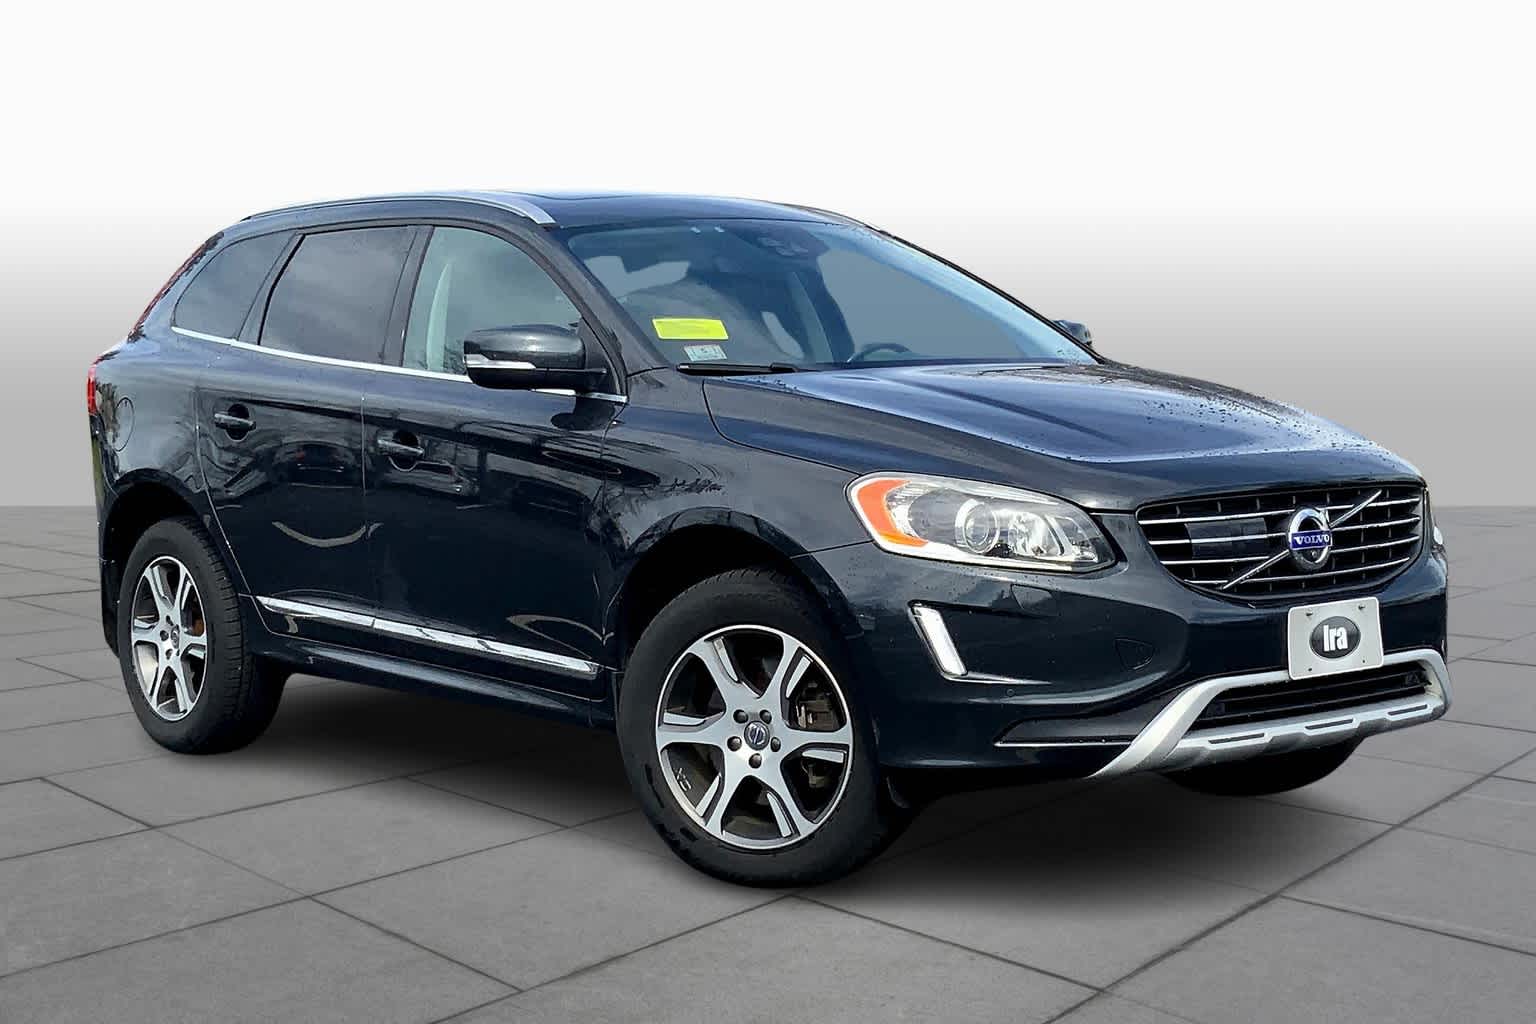 Used 2015 Volvo XC60 T6 Platinum with VIN YV4902RM0F2739646 for sale in Rockland, MA